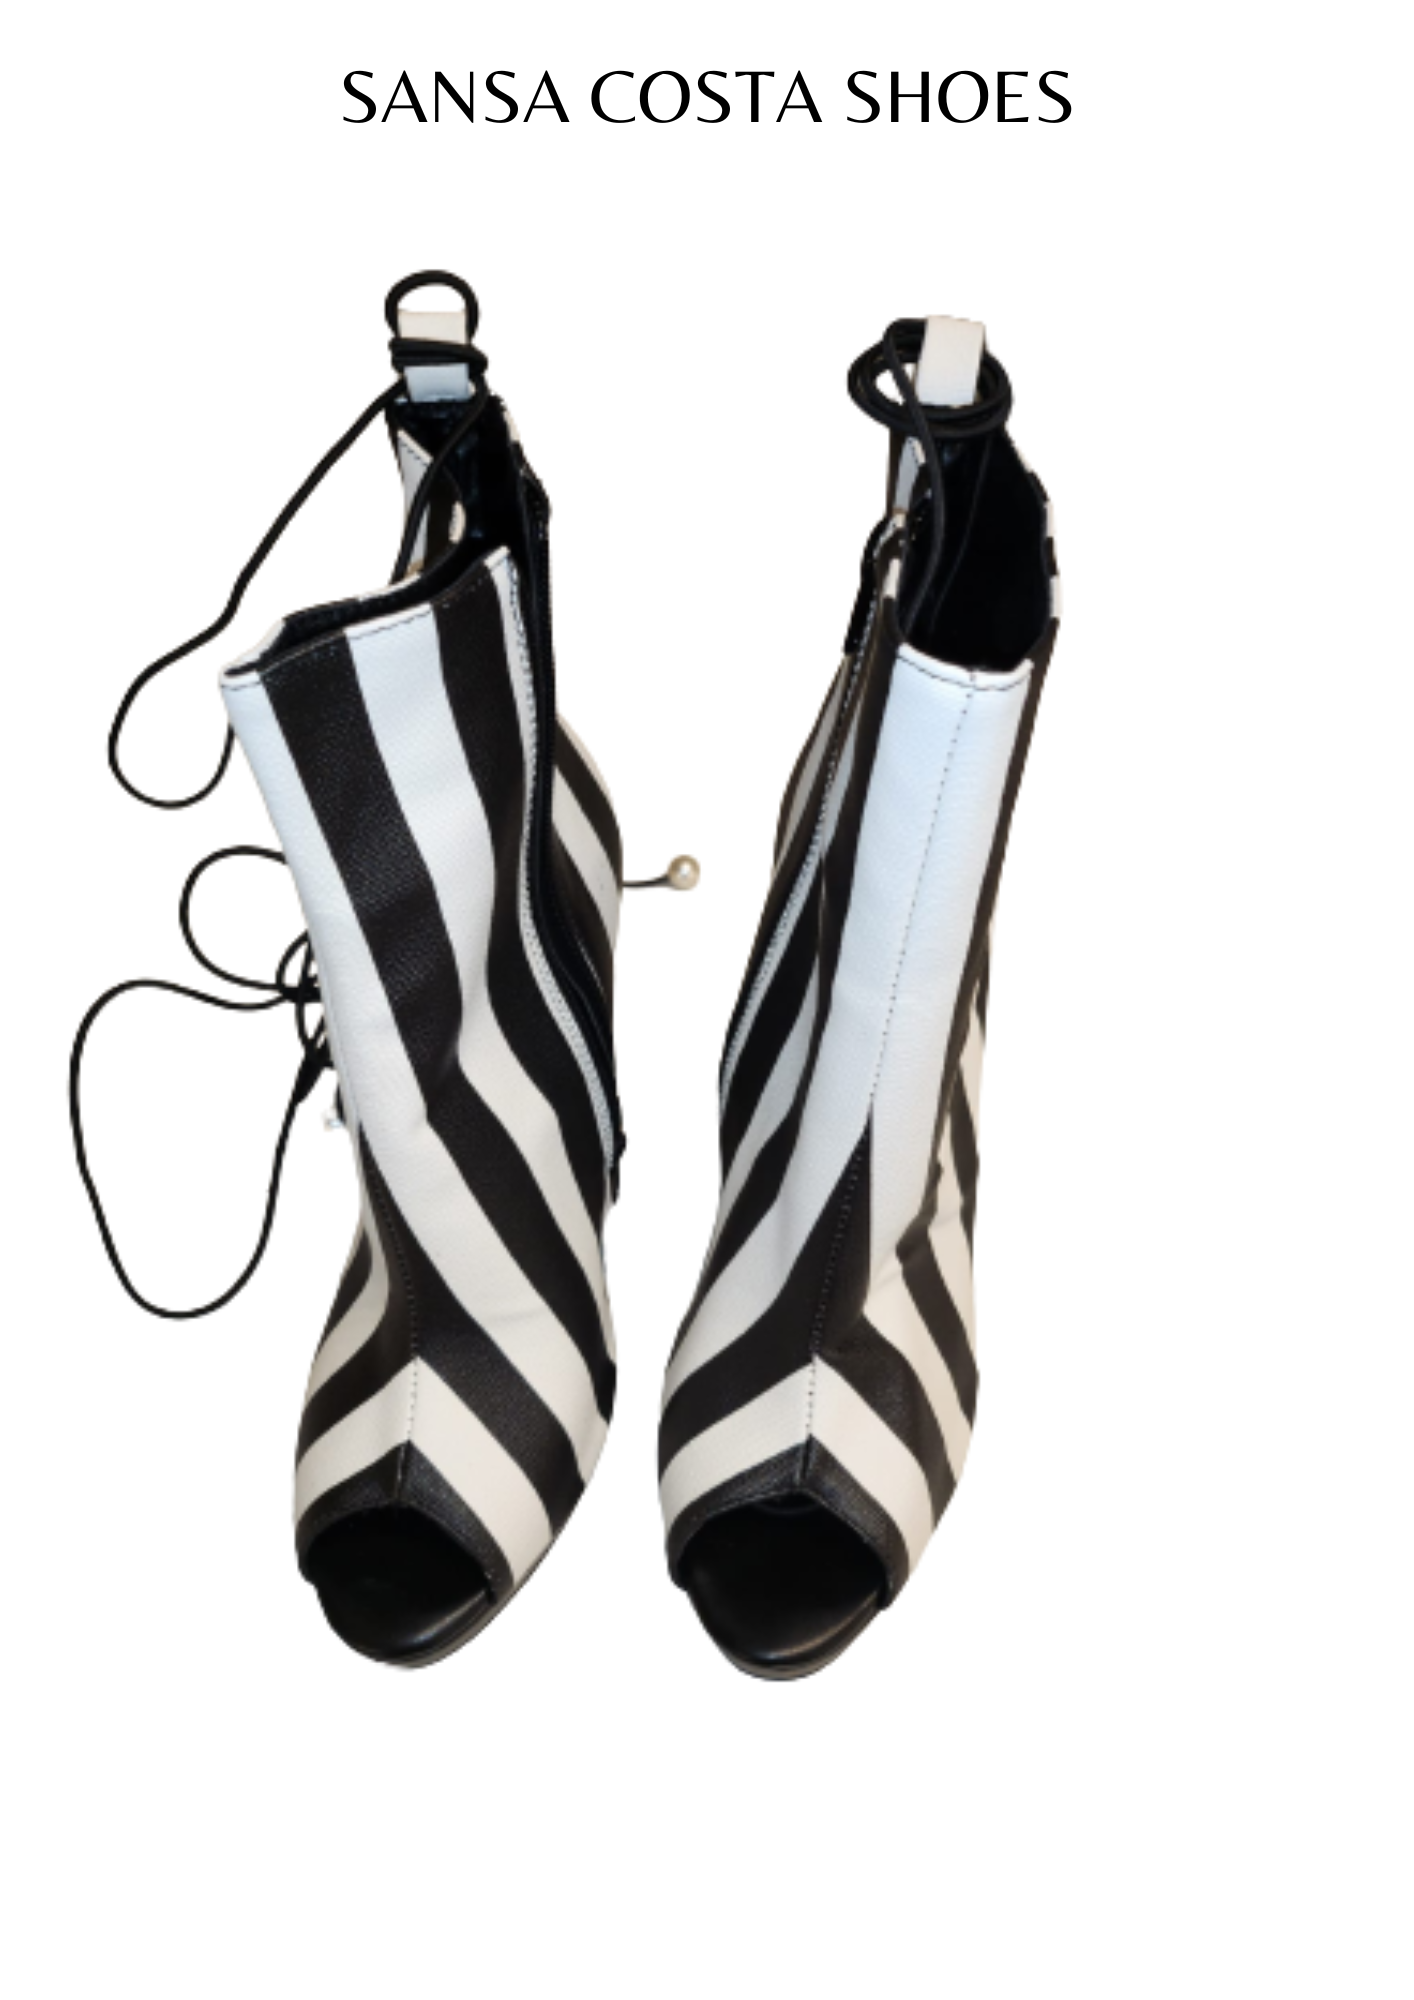 Clearance - Vertical Zebra White Ankle Boots